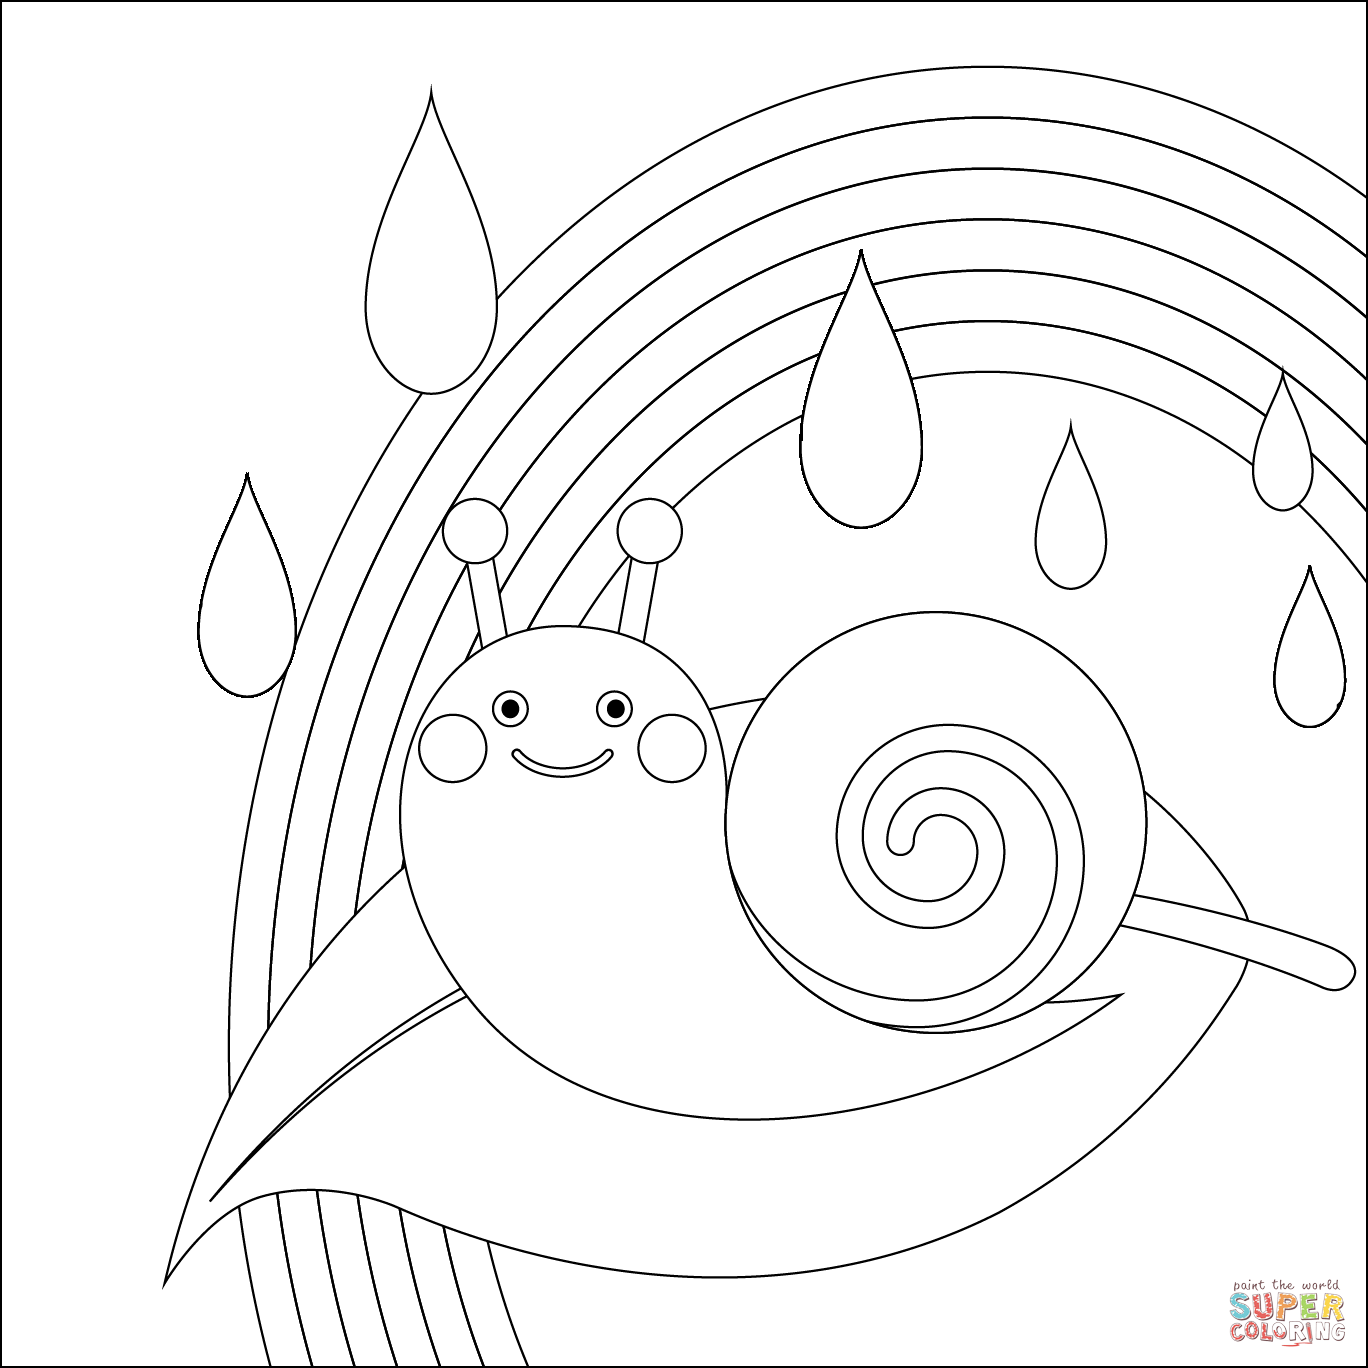 Snail and rainbow coloring page free printable coloring pages